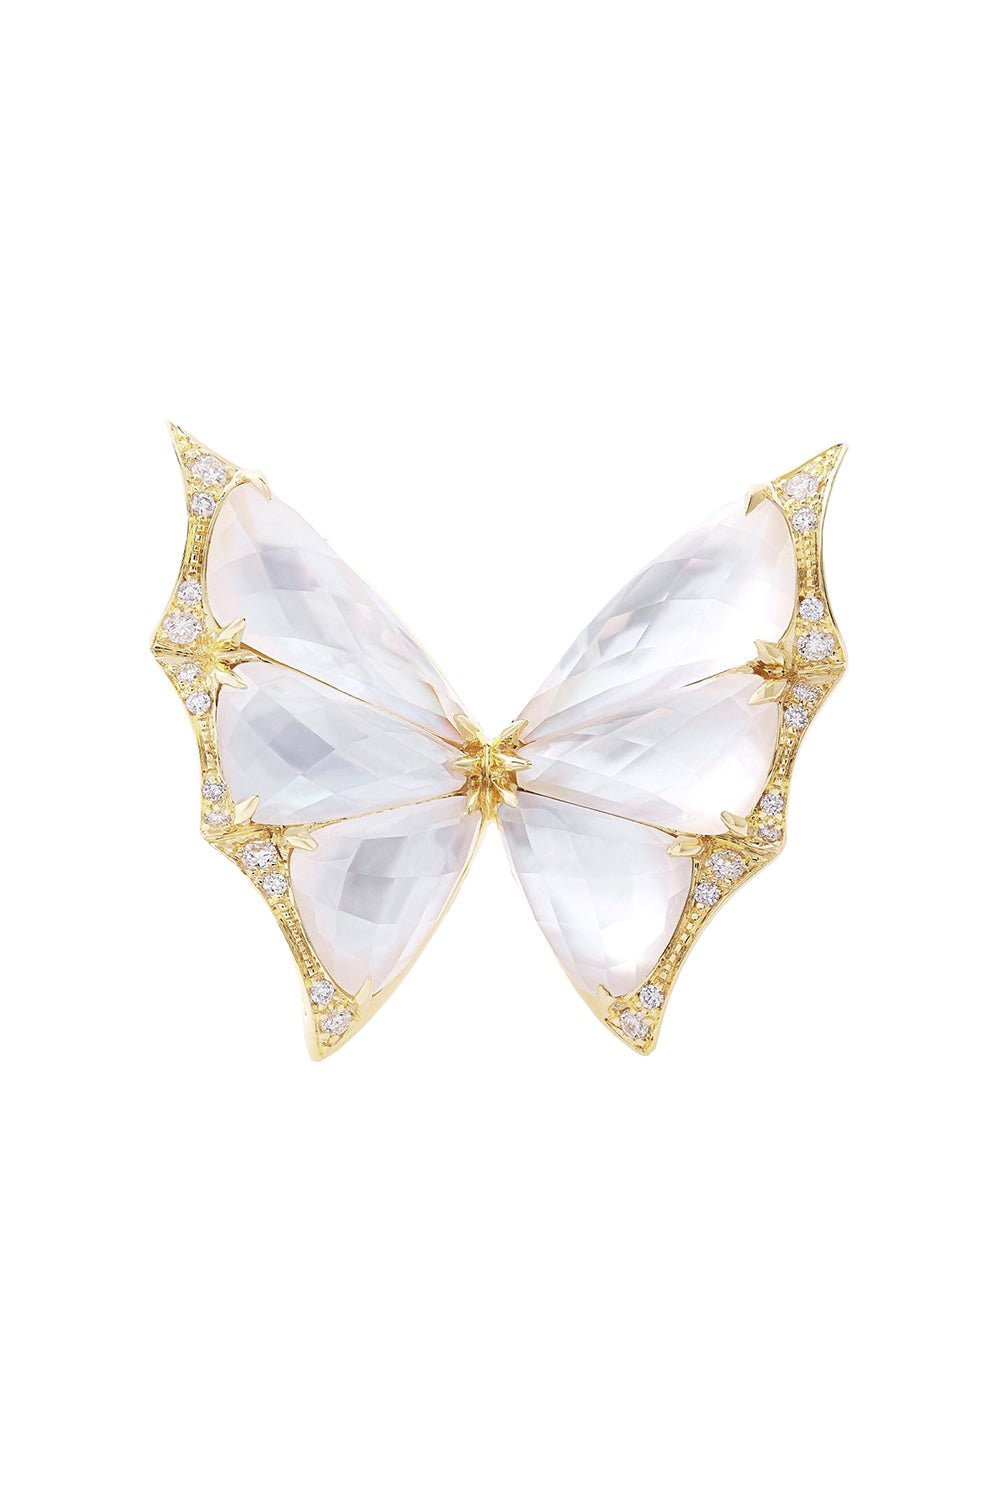 STEPHEN WEBSTER-Fly By Night Small Cocktail Ring-YELLOW GOLD